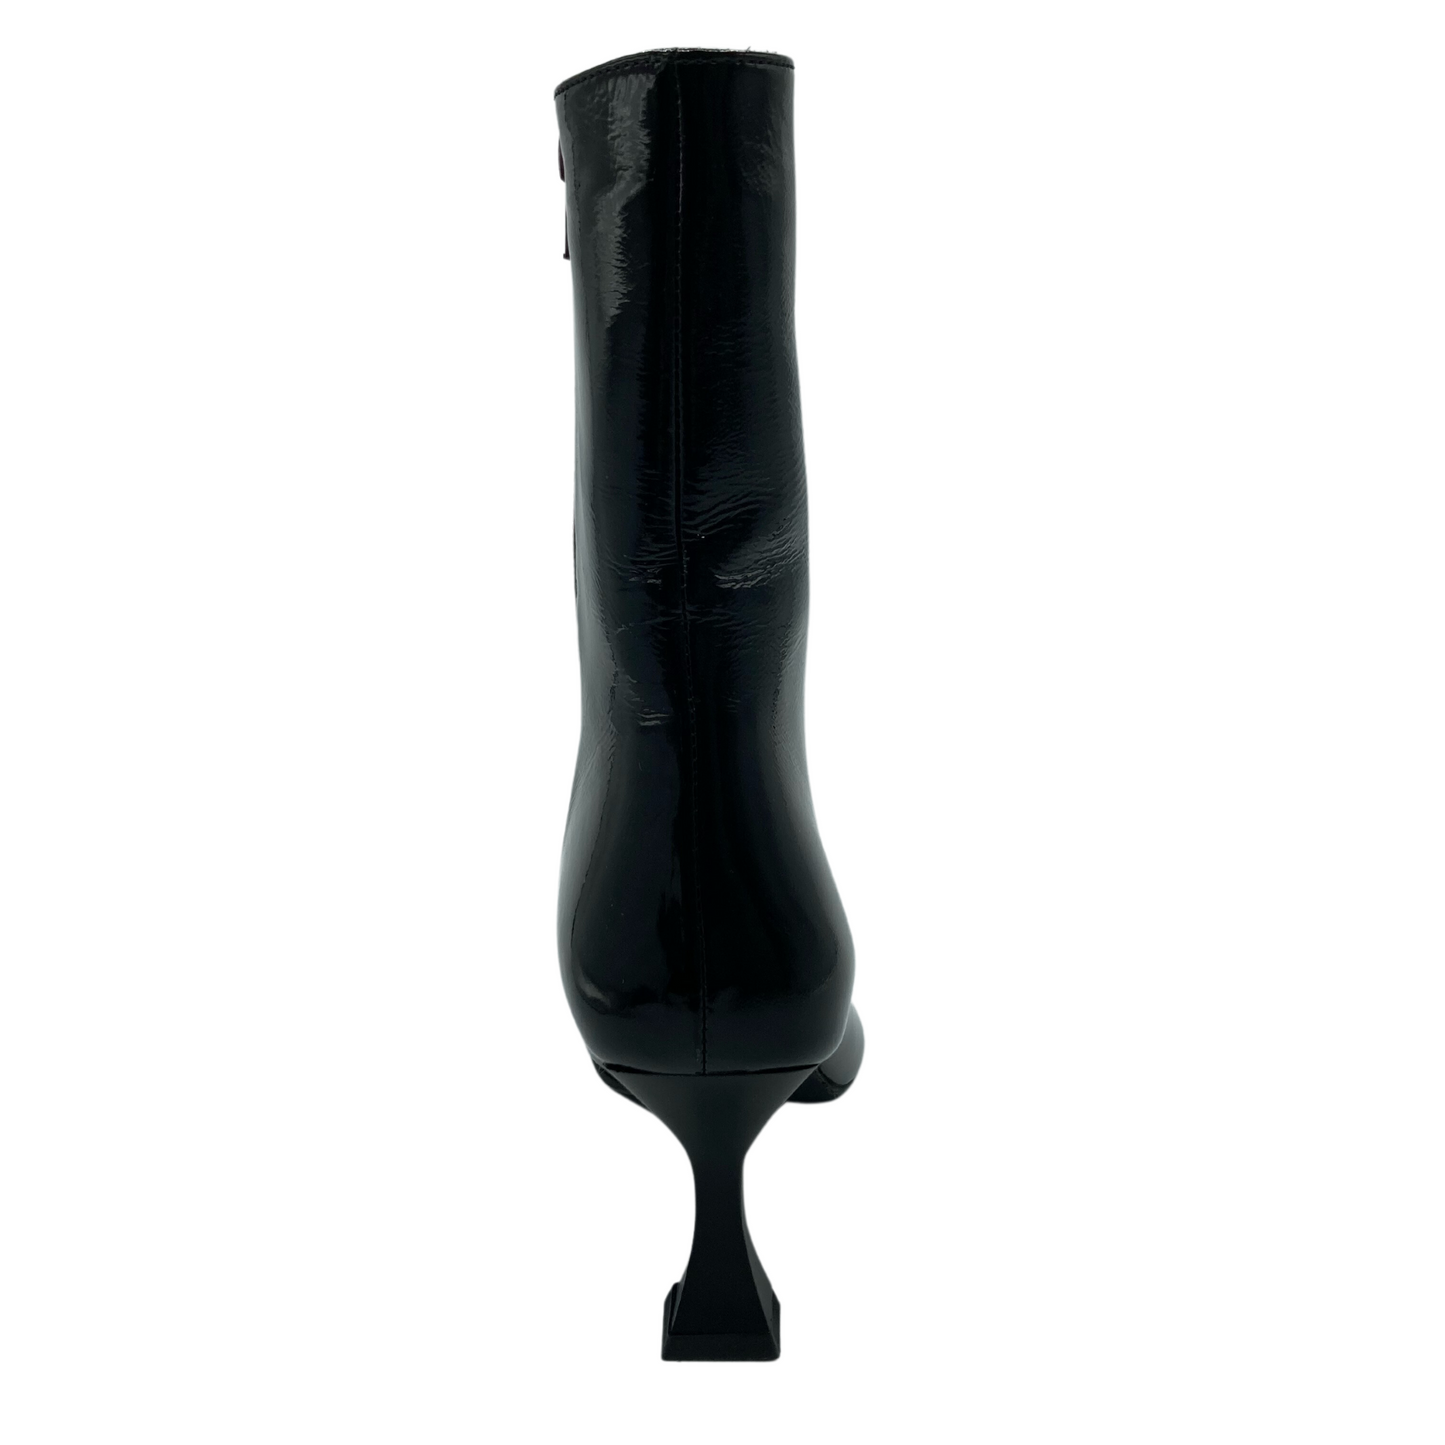 Back view of black patent leather short boot with flared heel and side zipper closure